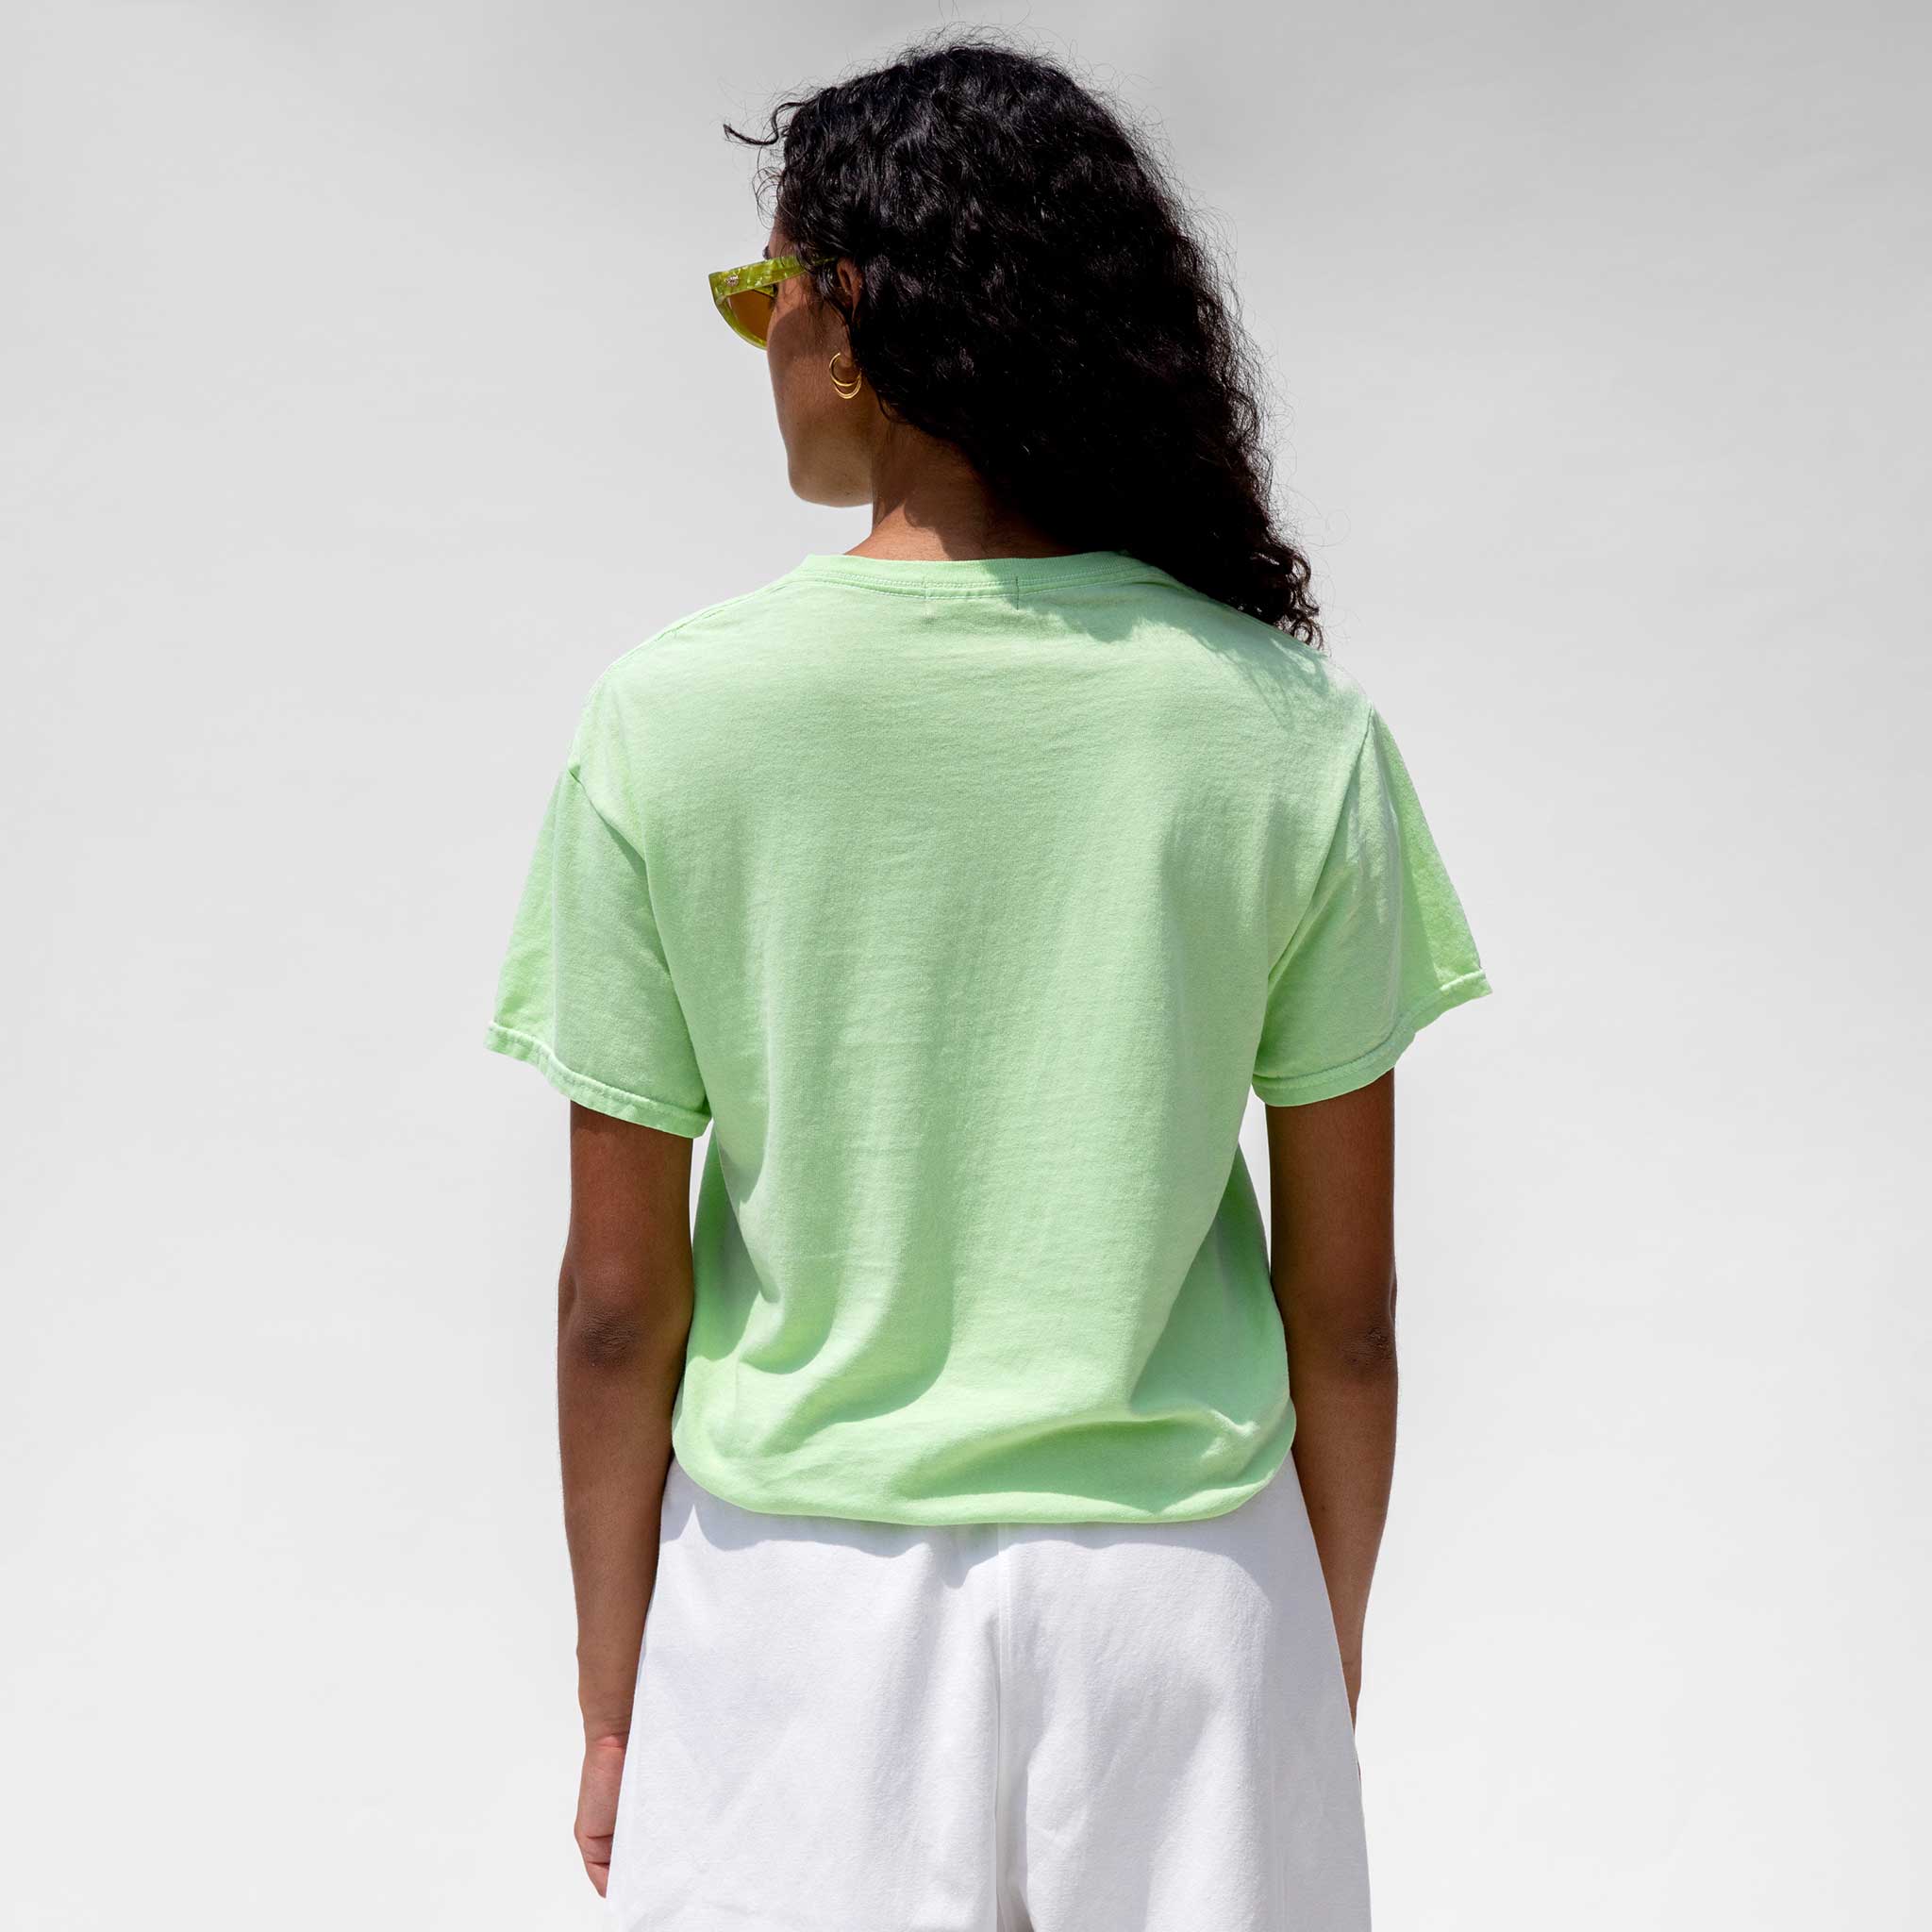 Back close photo of model wearing the Vintage Washed LCD10 Short Sleeve Motto Tee - Green, 